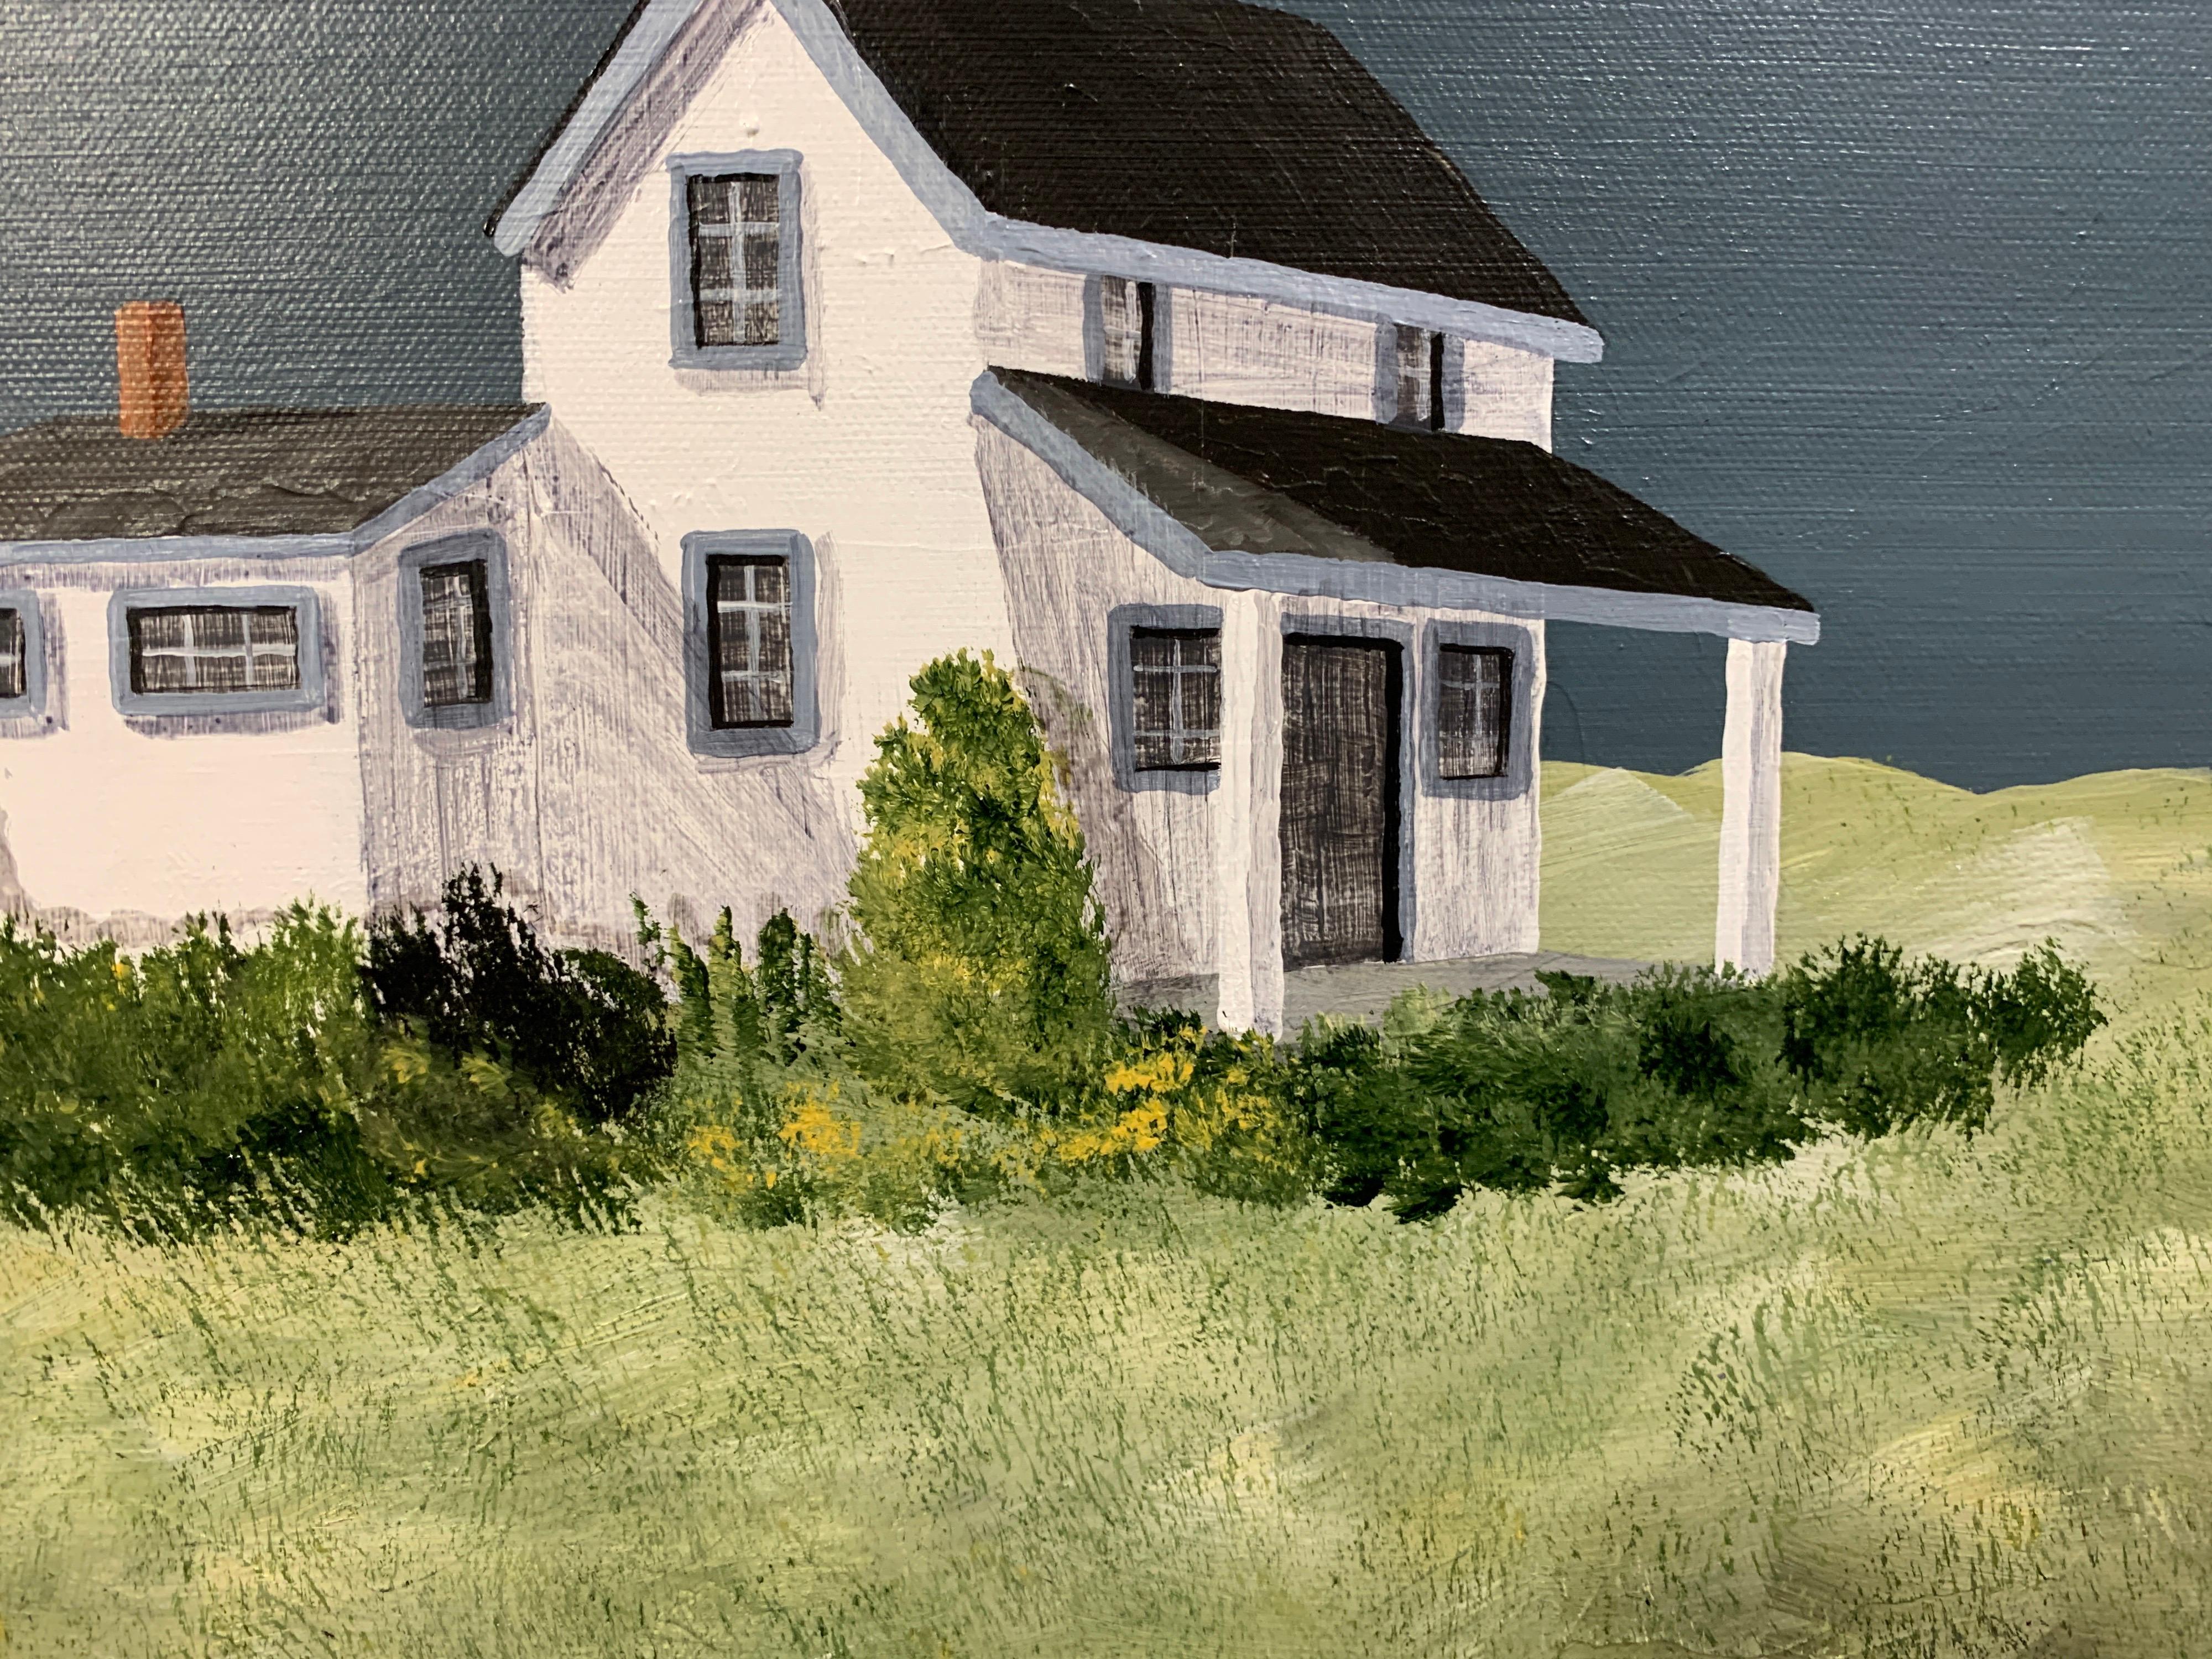 Respite Cottage by Susan Kinsella, vertical contemporary landscape painting 3